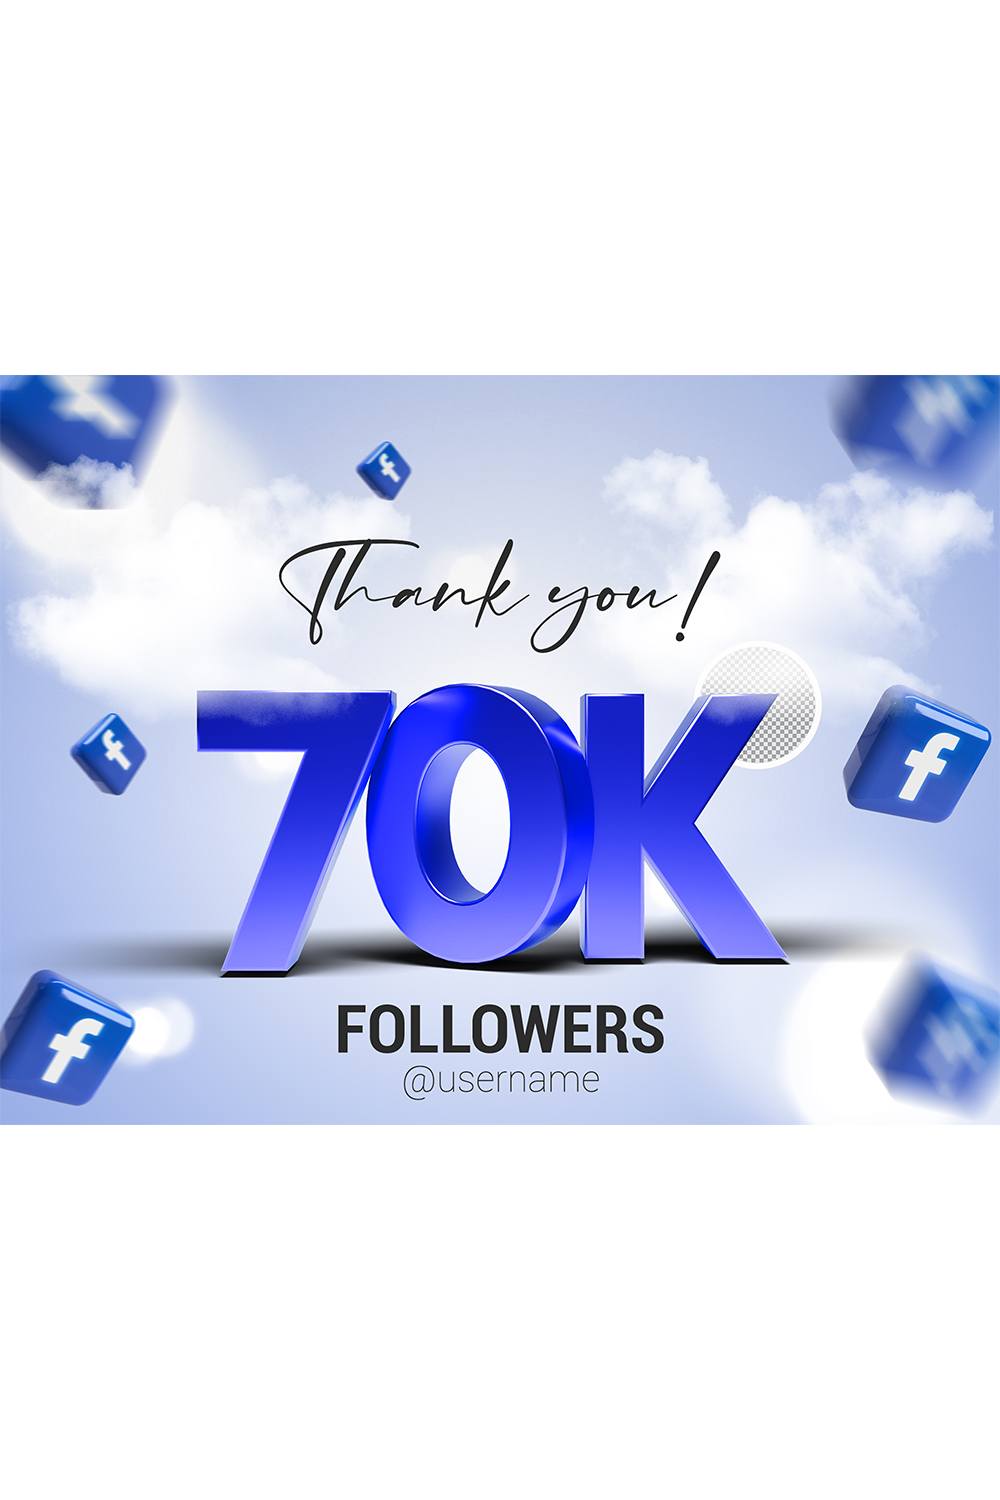 70K Followers In Facebook PSD pinterest preview image.